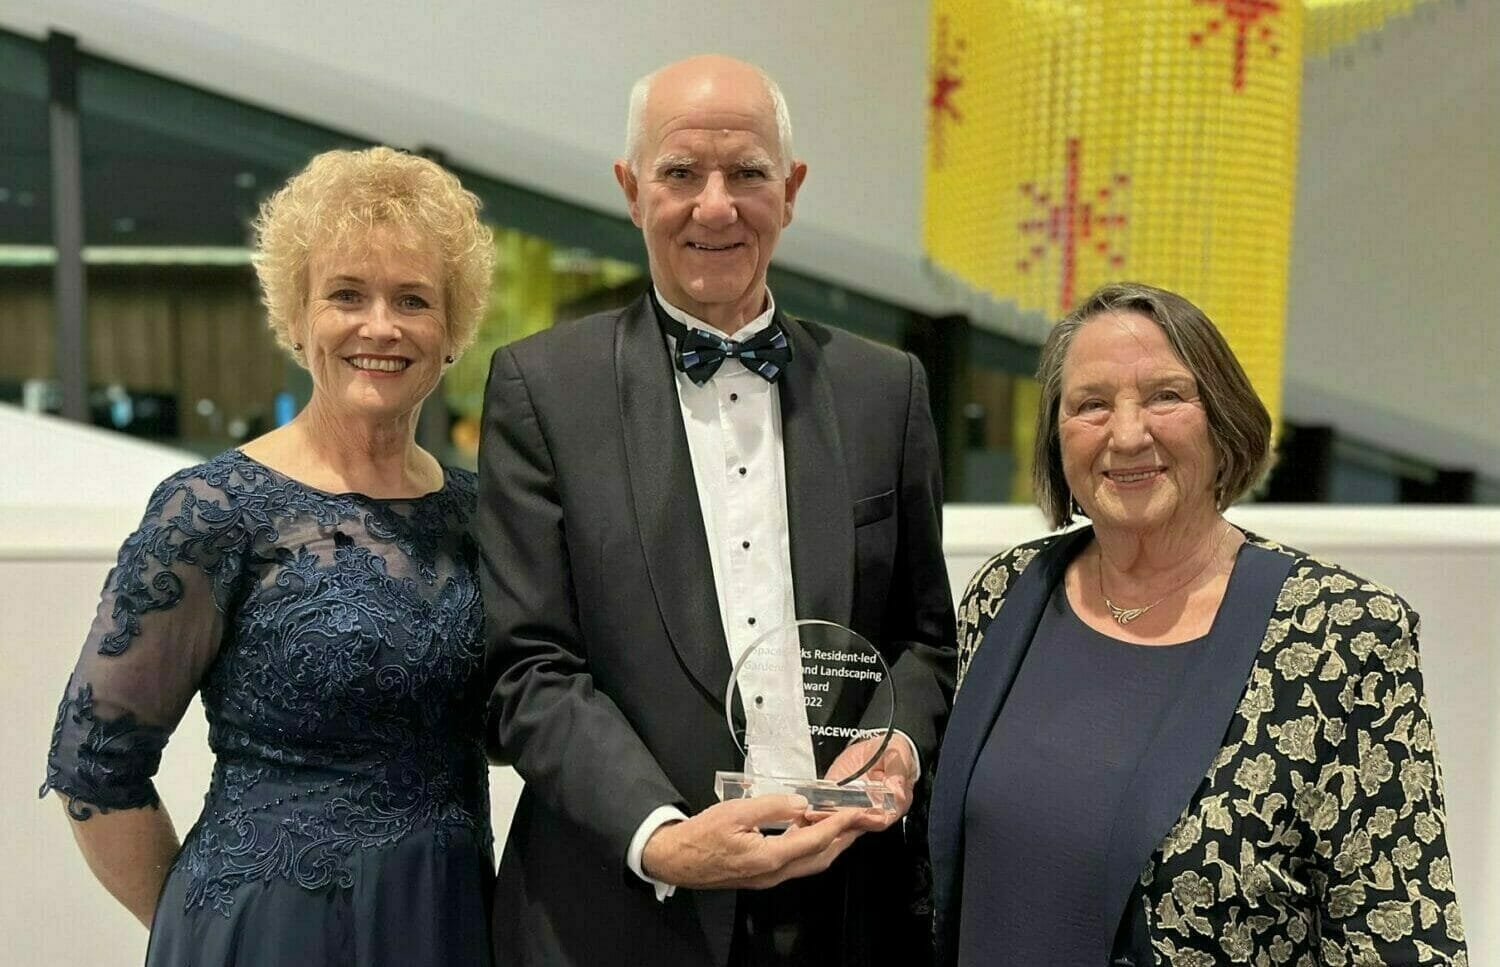 Stephen Parr with Maggie Owens (Metlifecare Board Director) and Kapiti Village resident finalist Carolyn Lane.